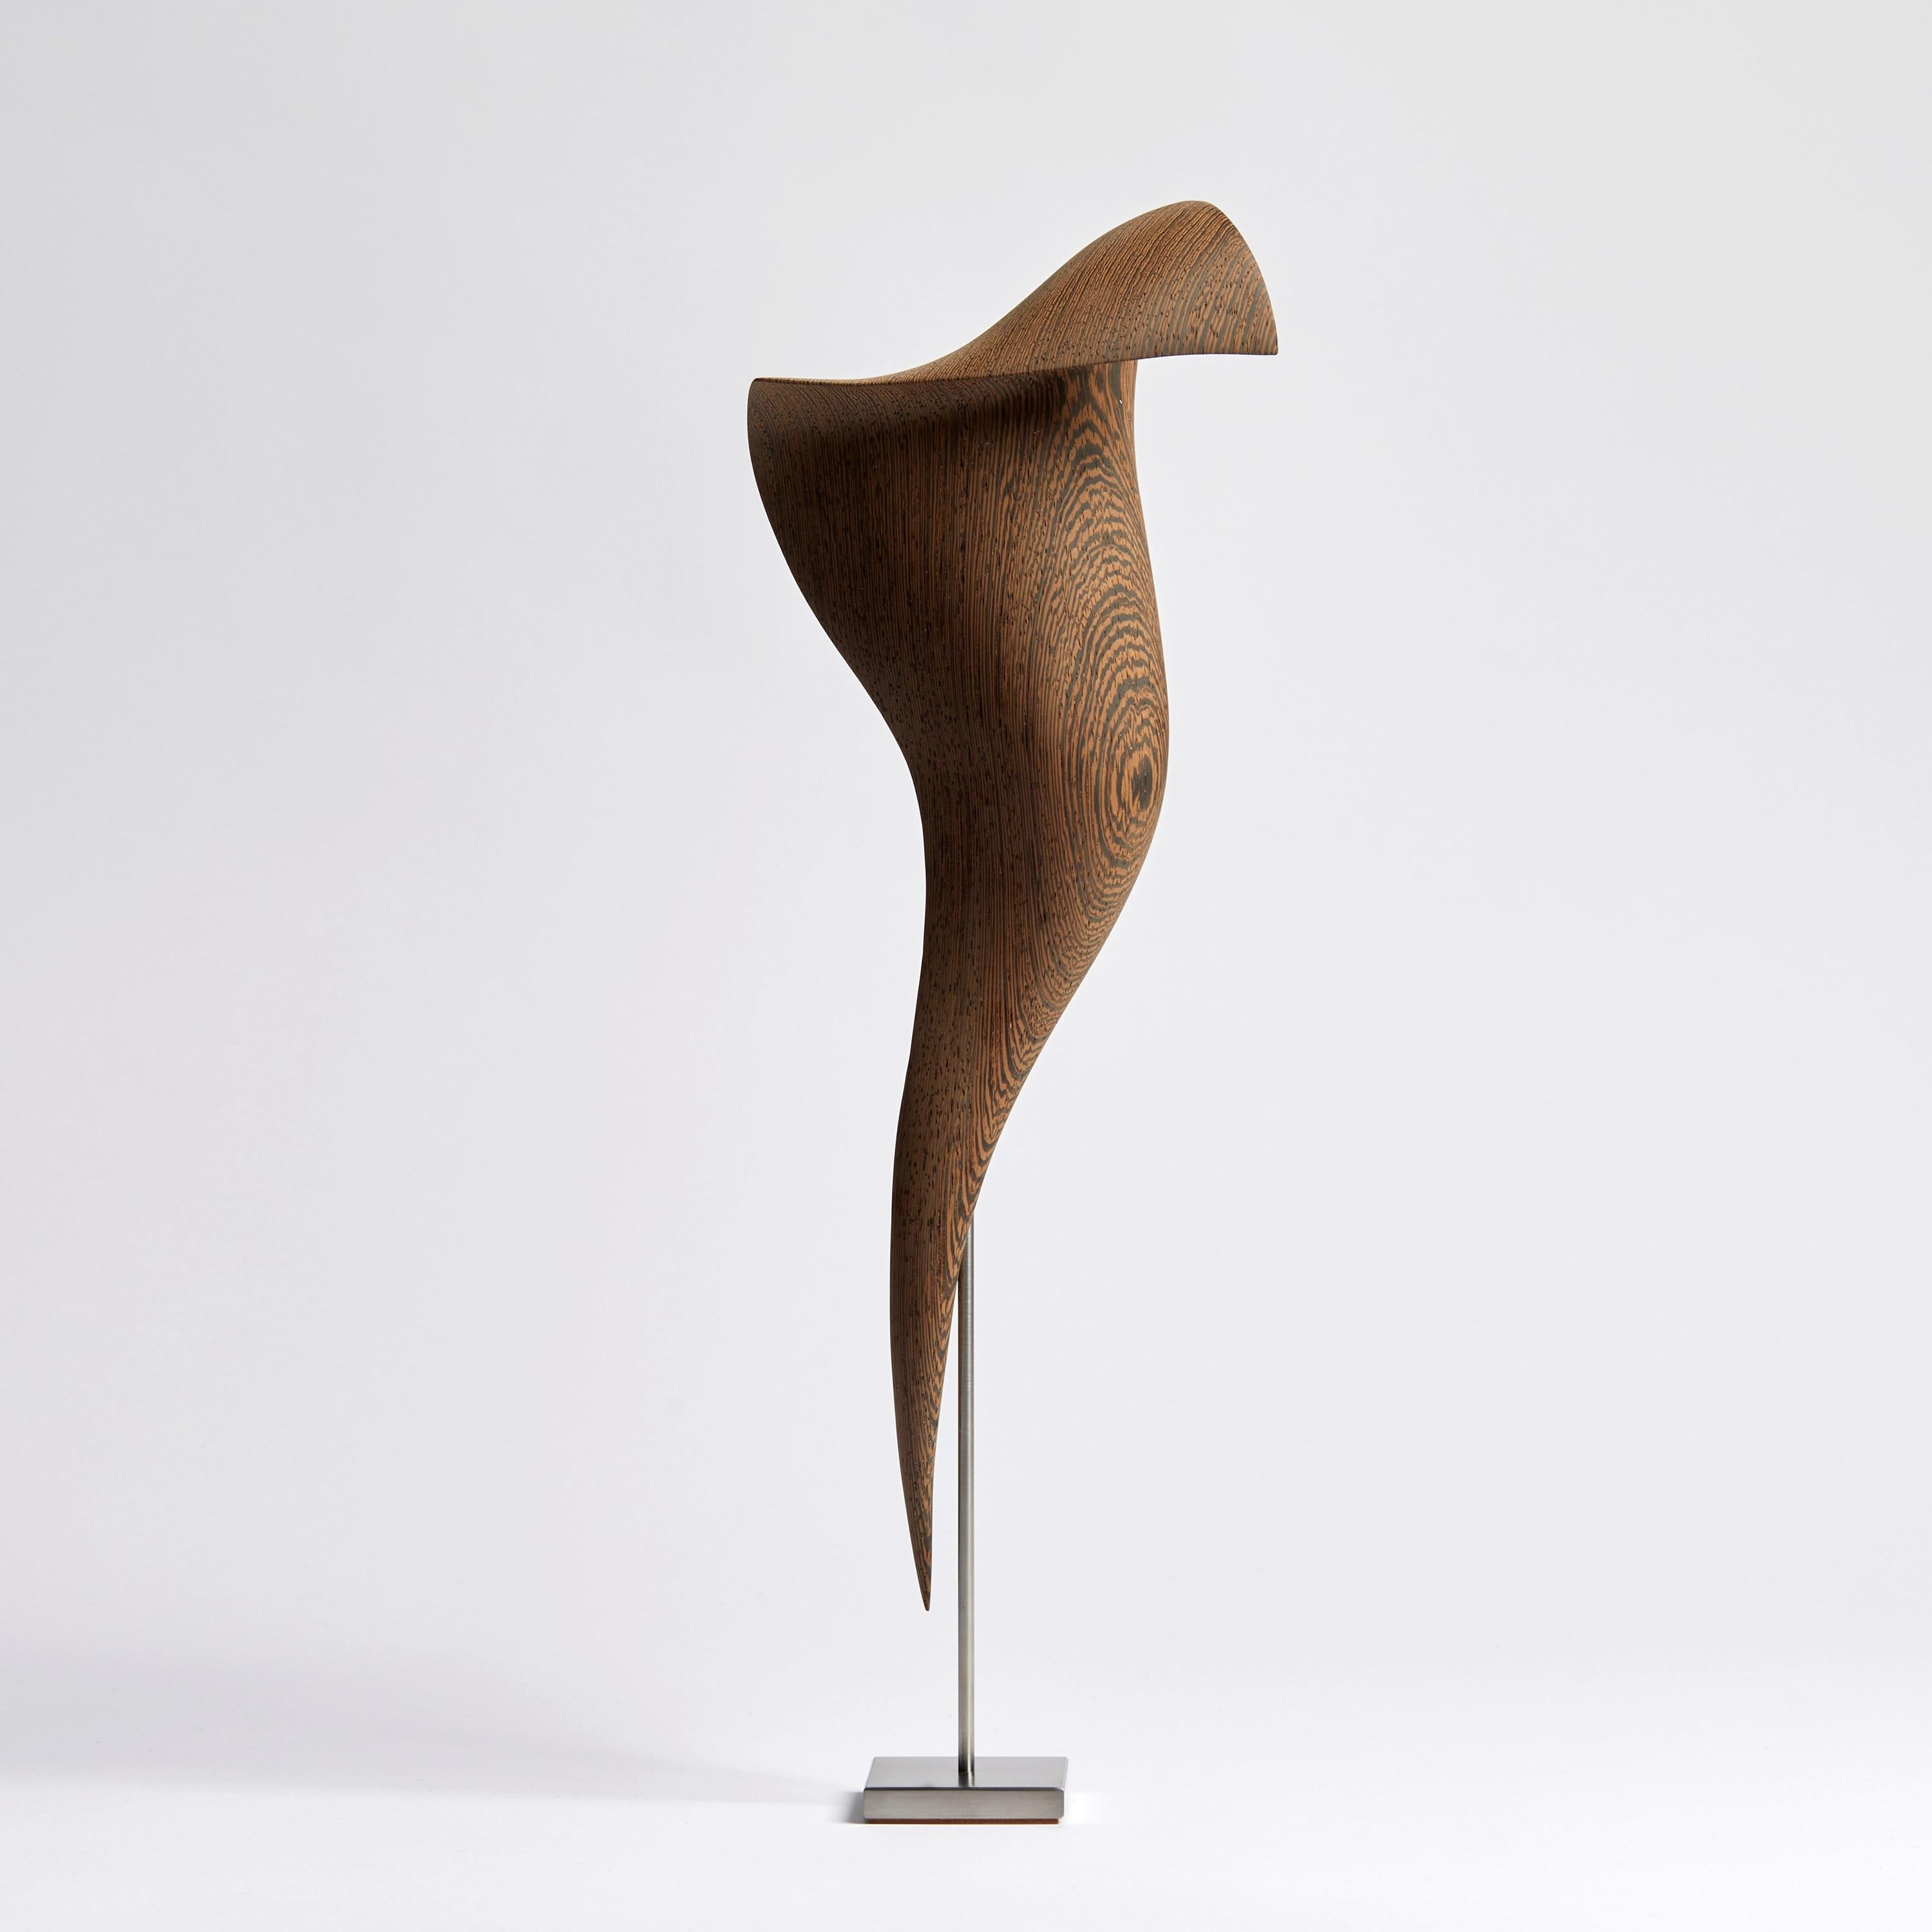 Hand-Crafted Flow Petit No 3, an Abstract Wooden Sculpture by the Danish Studio Egeværk